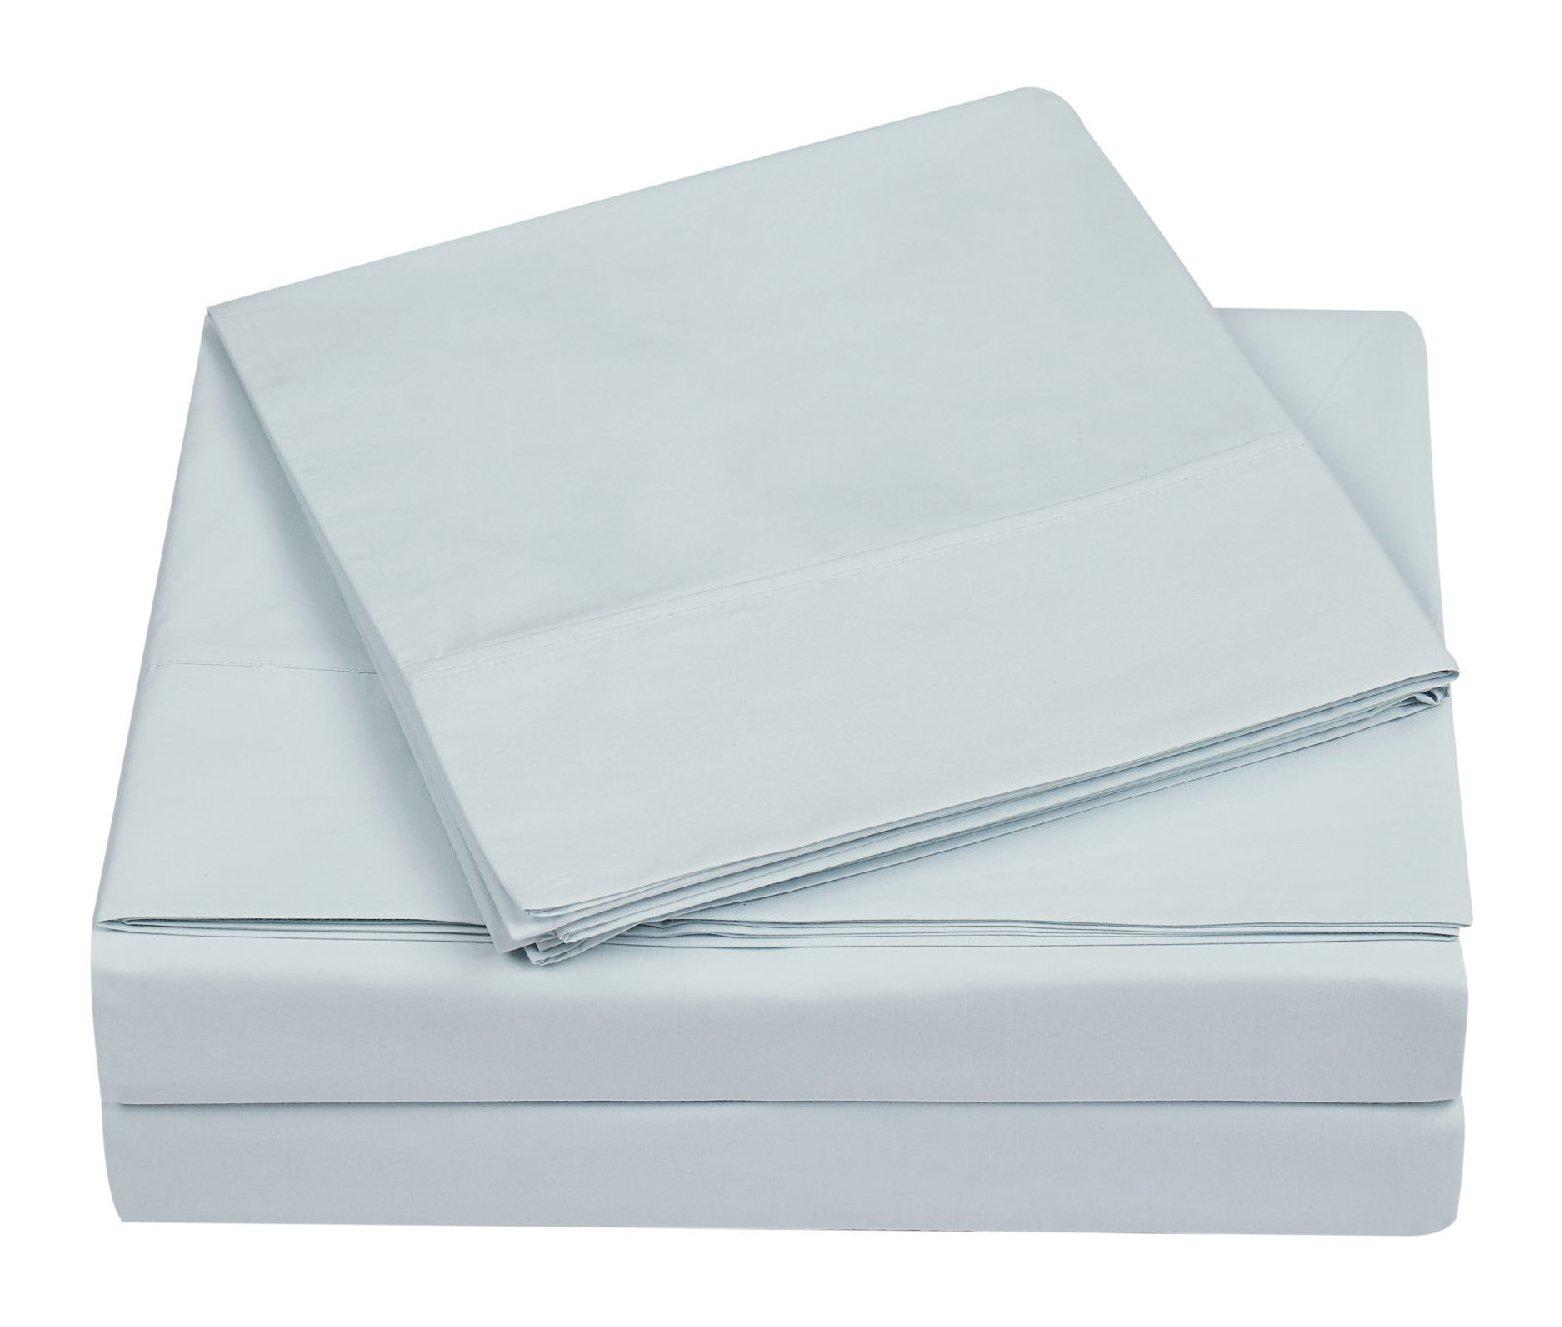 Charisma Home 400 Thread Count Percale King Pillow